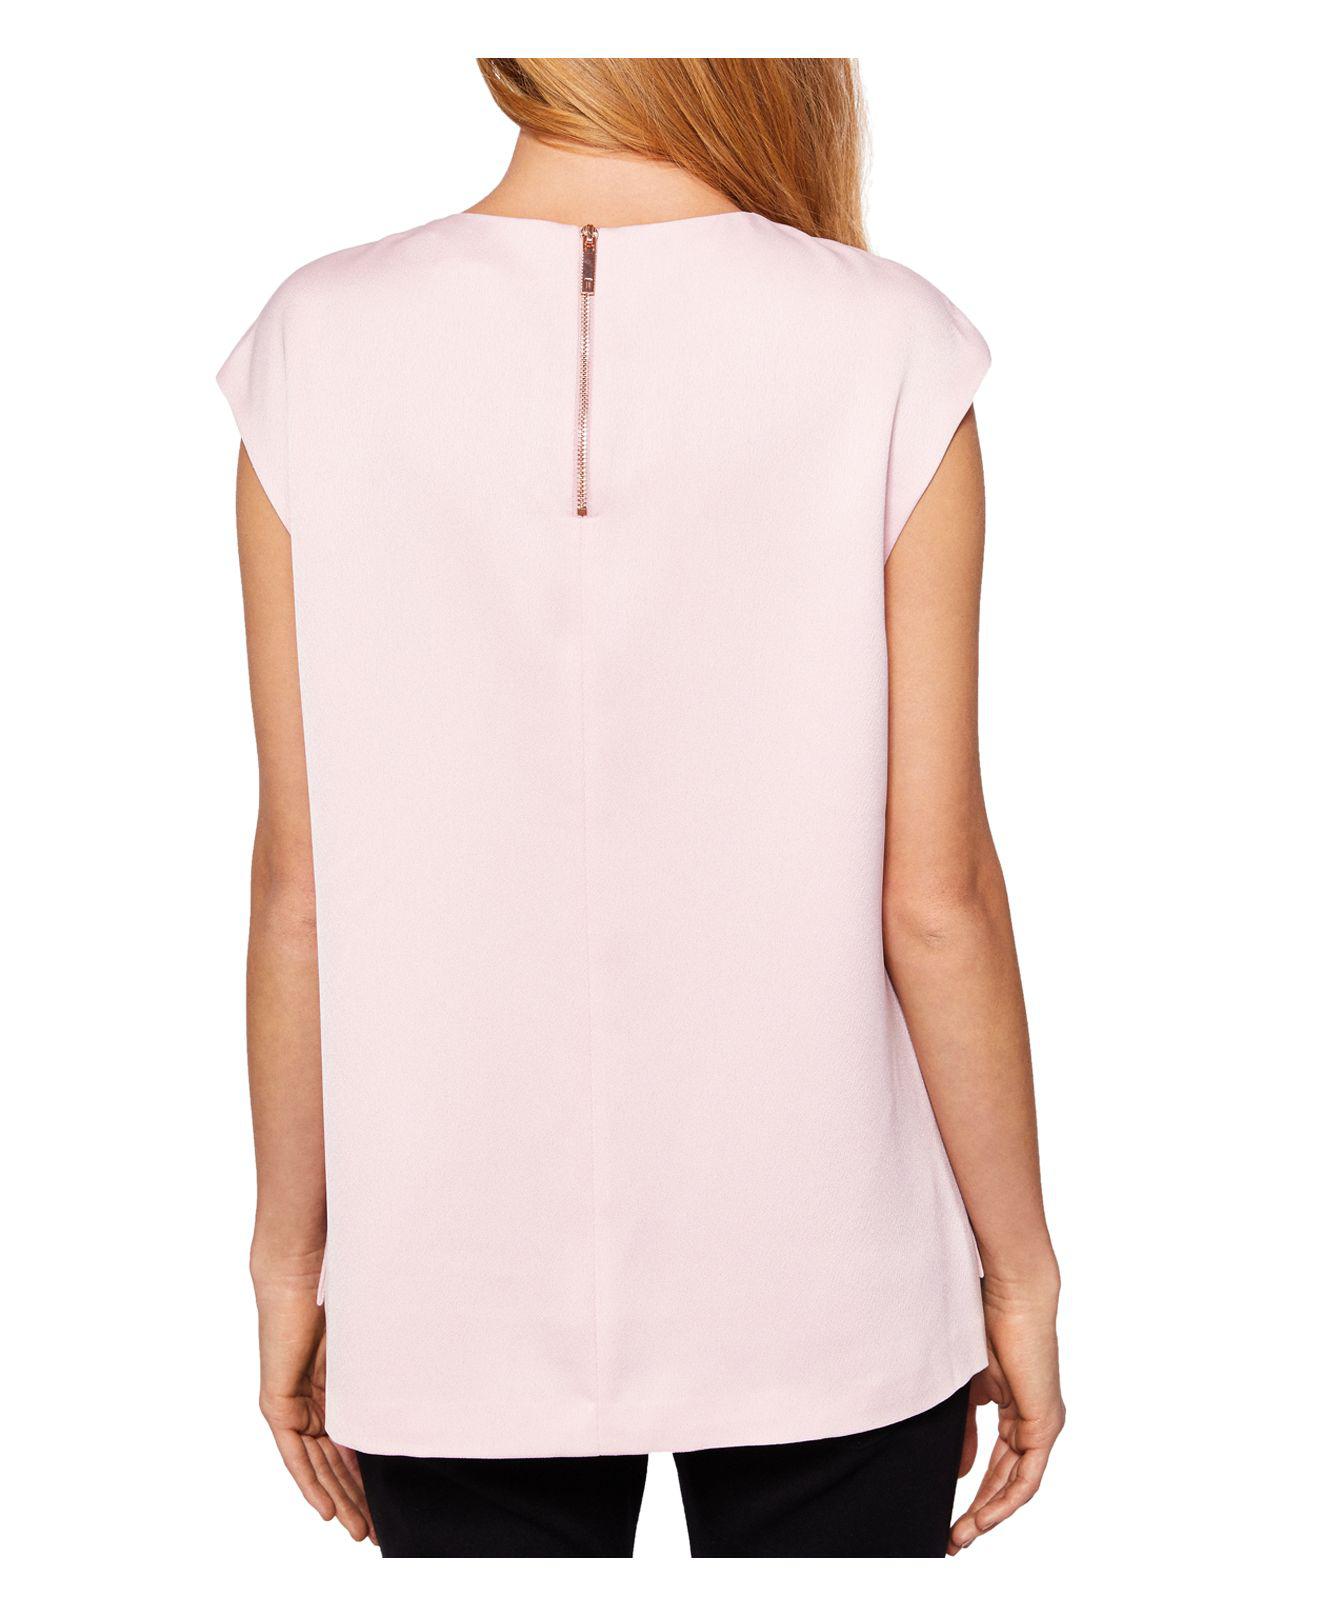 Ted Baker Pearl Embellished Top in Dusky Pink (Pink) | Lyst